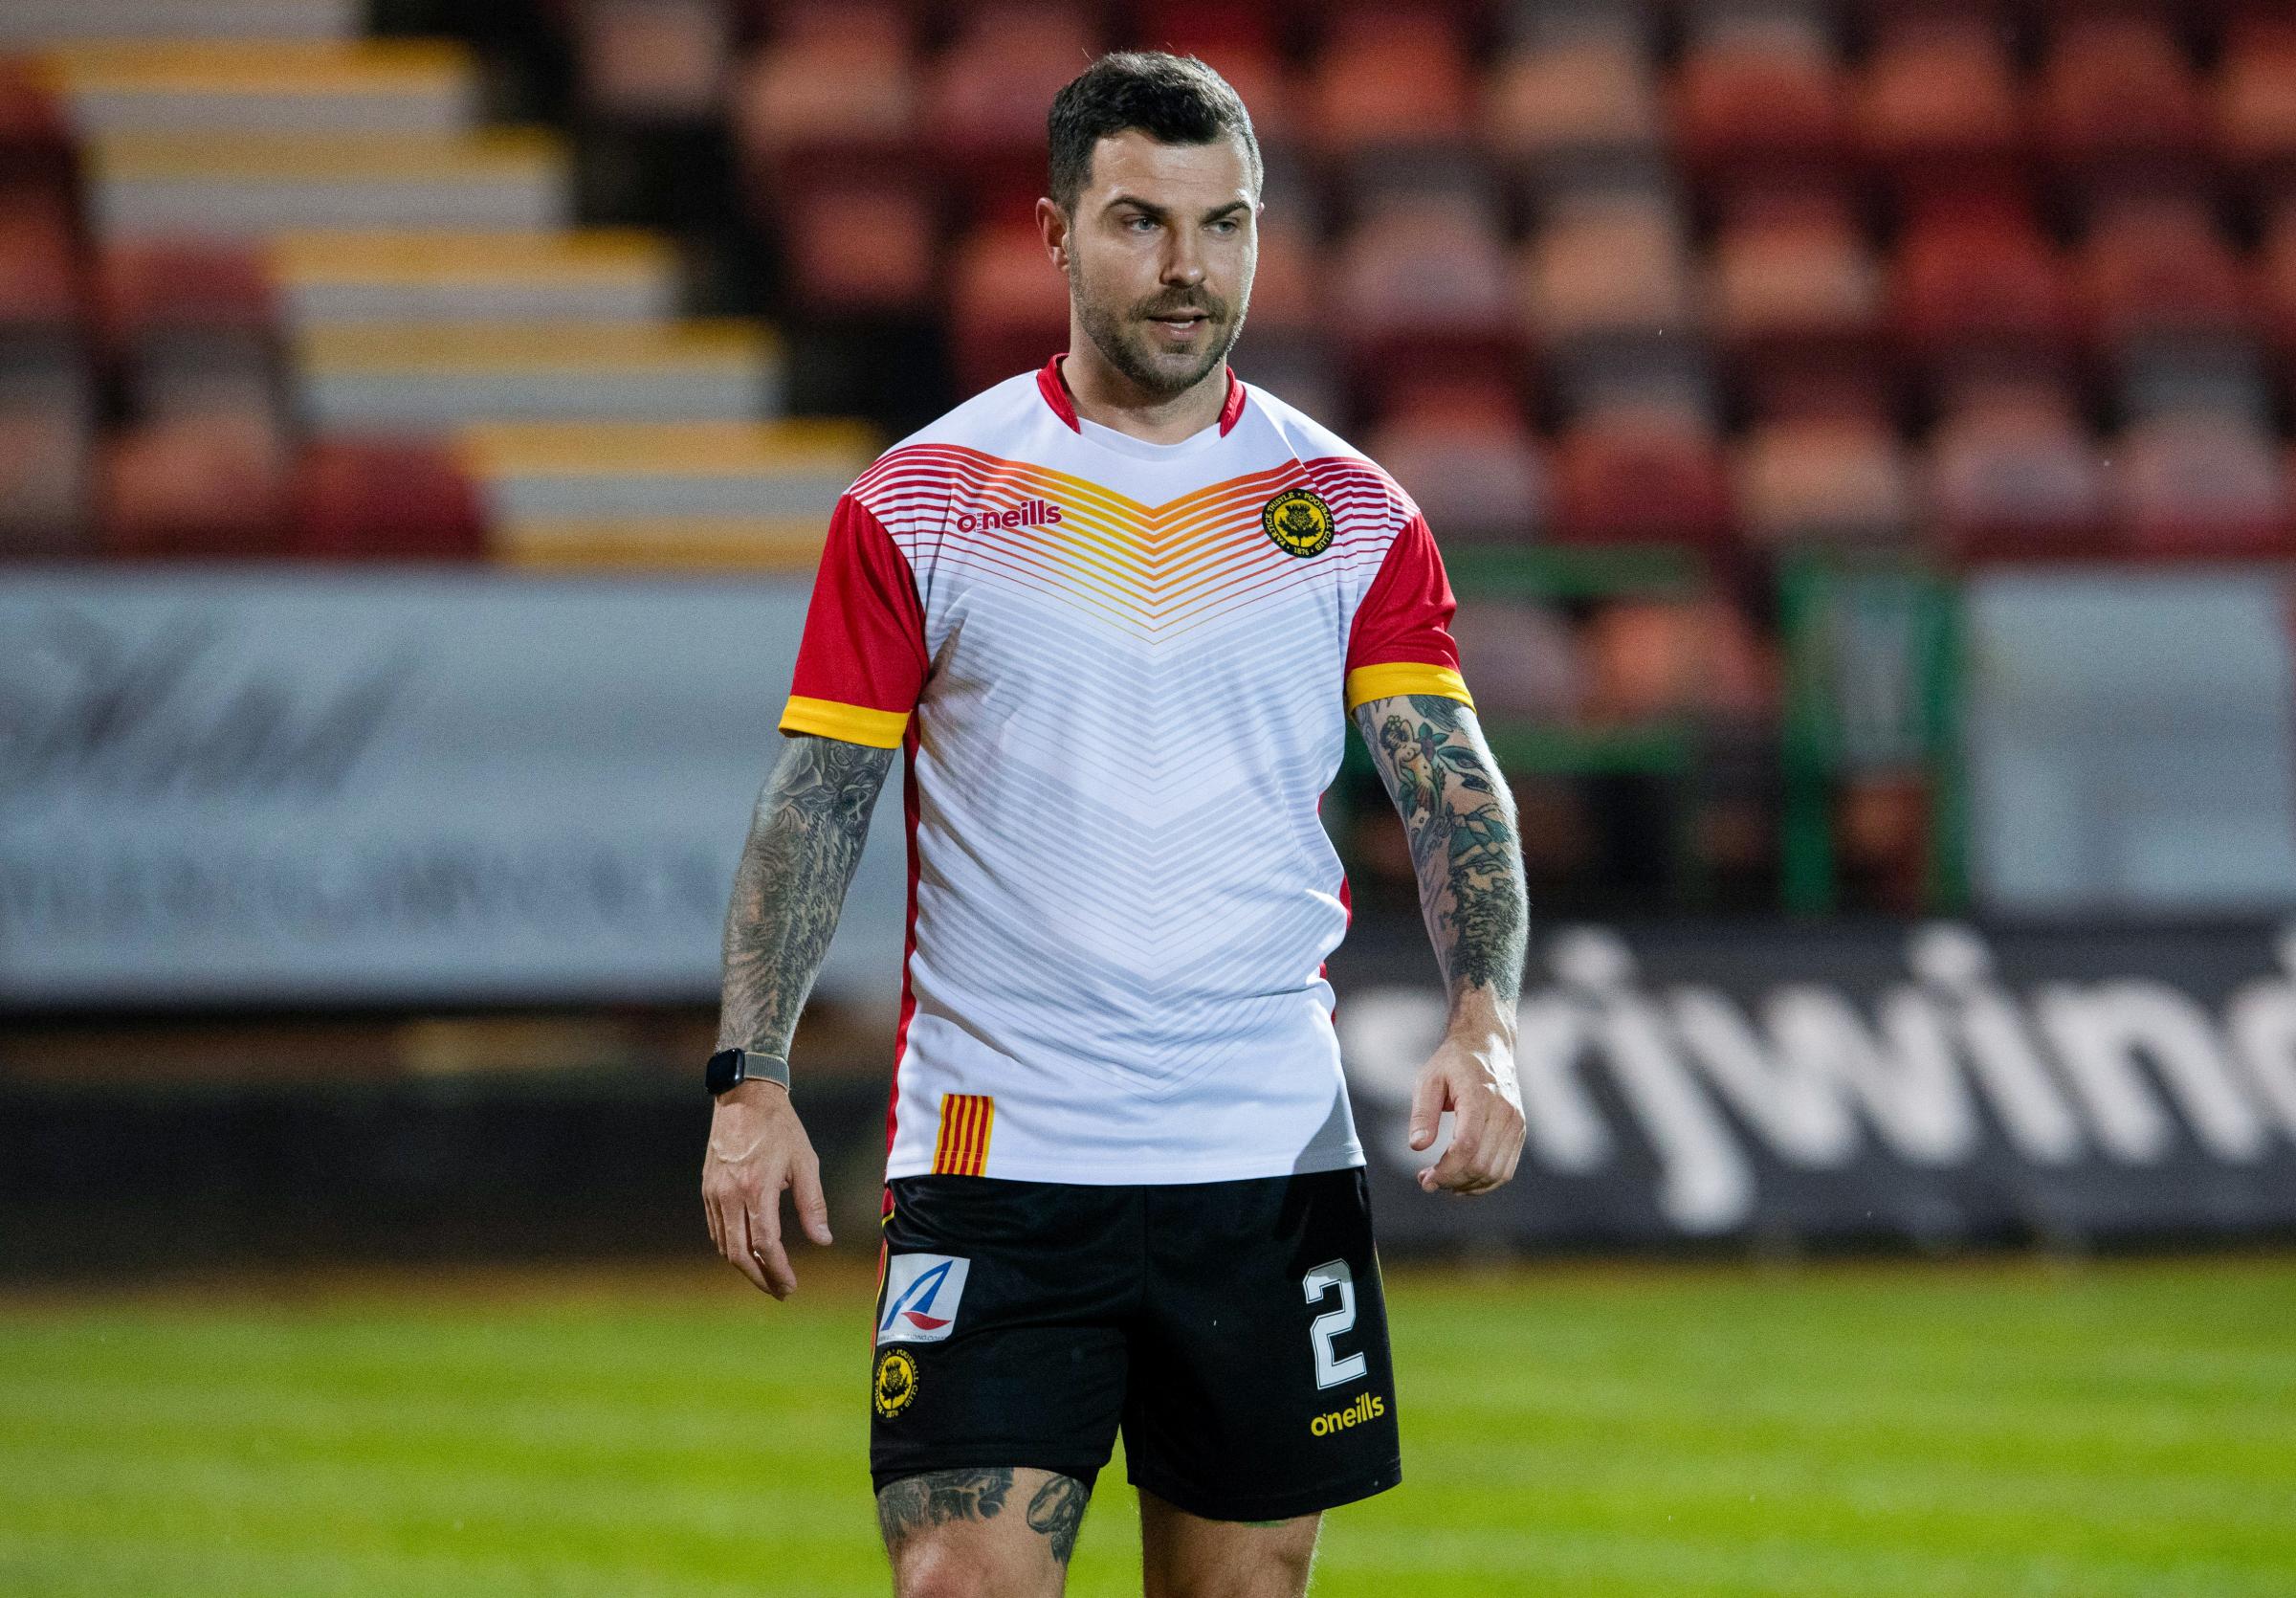 Richard Foster exits Partick Thistle after fan bust up as Ian McCall praises experienced defender